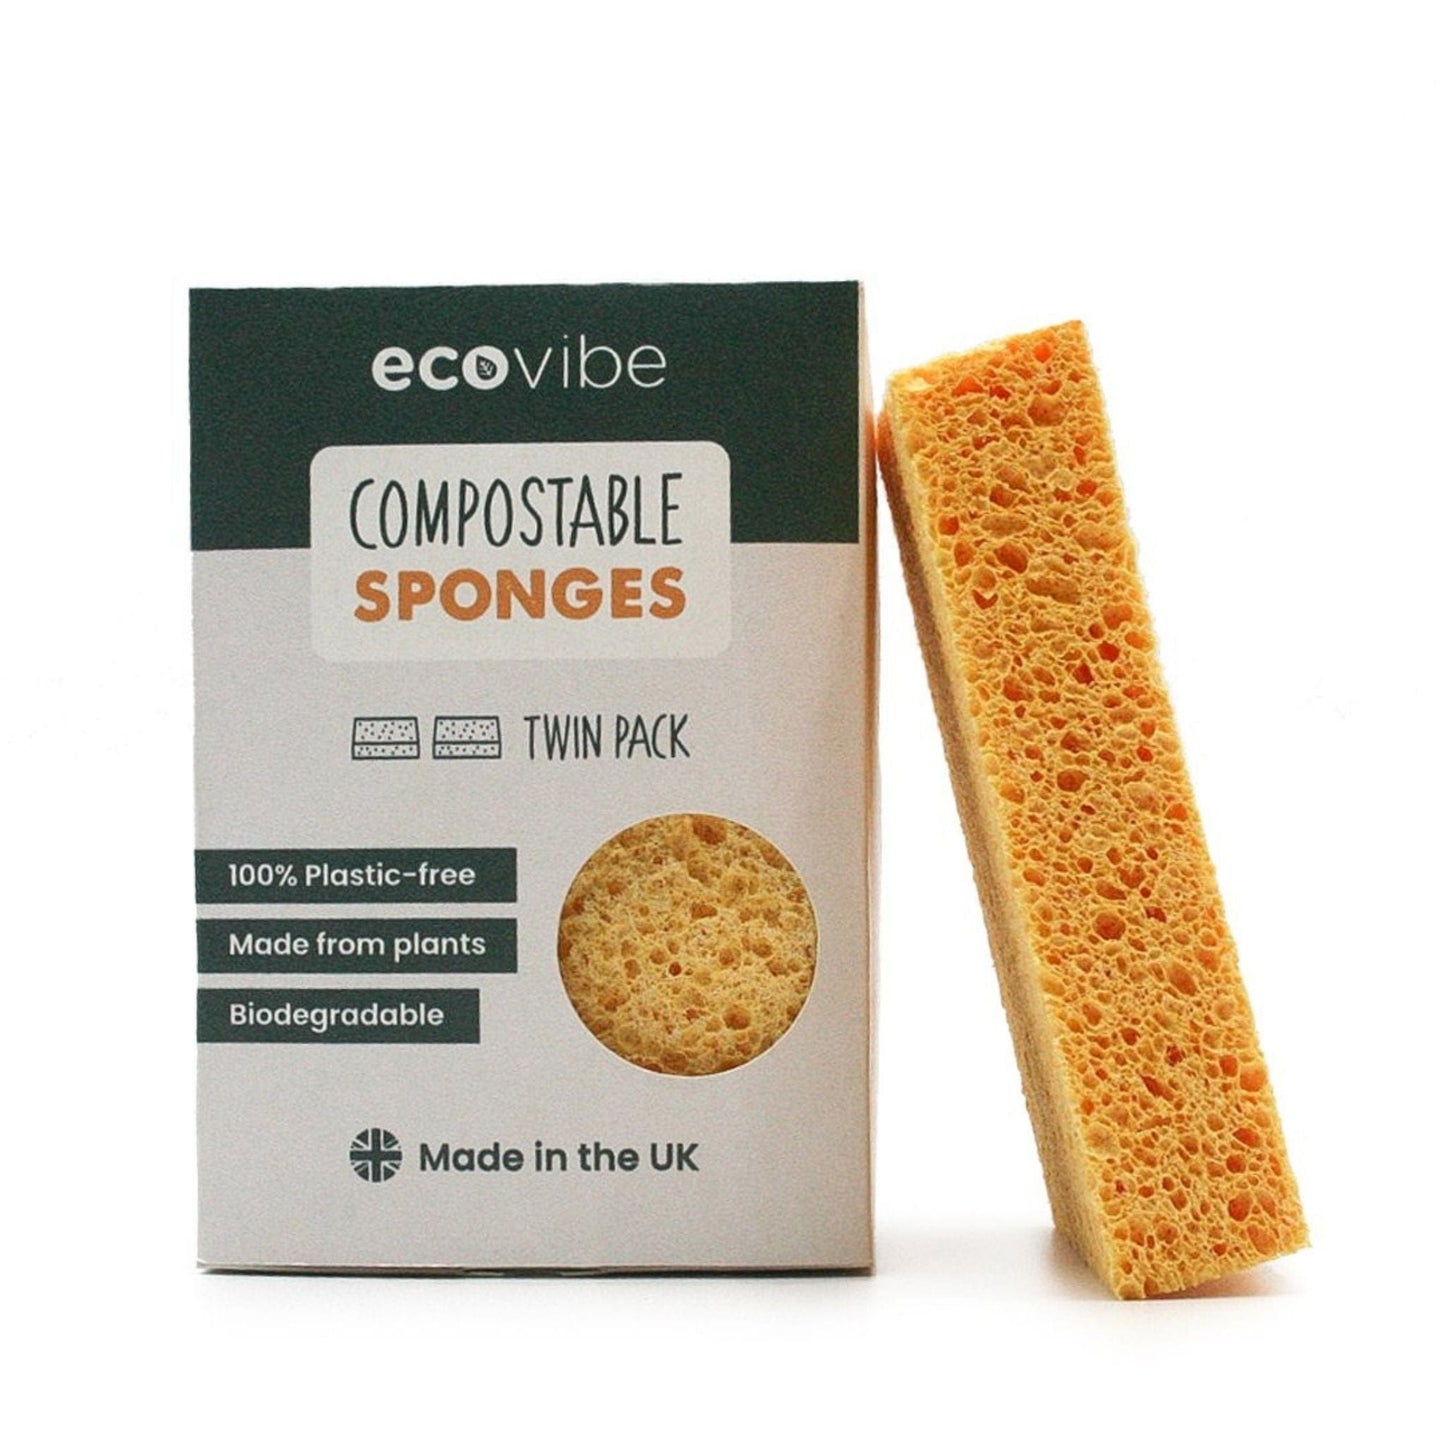 EcoVibe Sponges & Scouring Pads Plastic Free Compostable Sponges - 2-Pack - EcoVibe